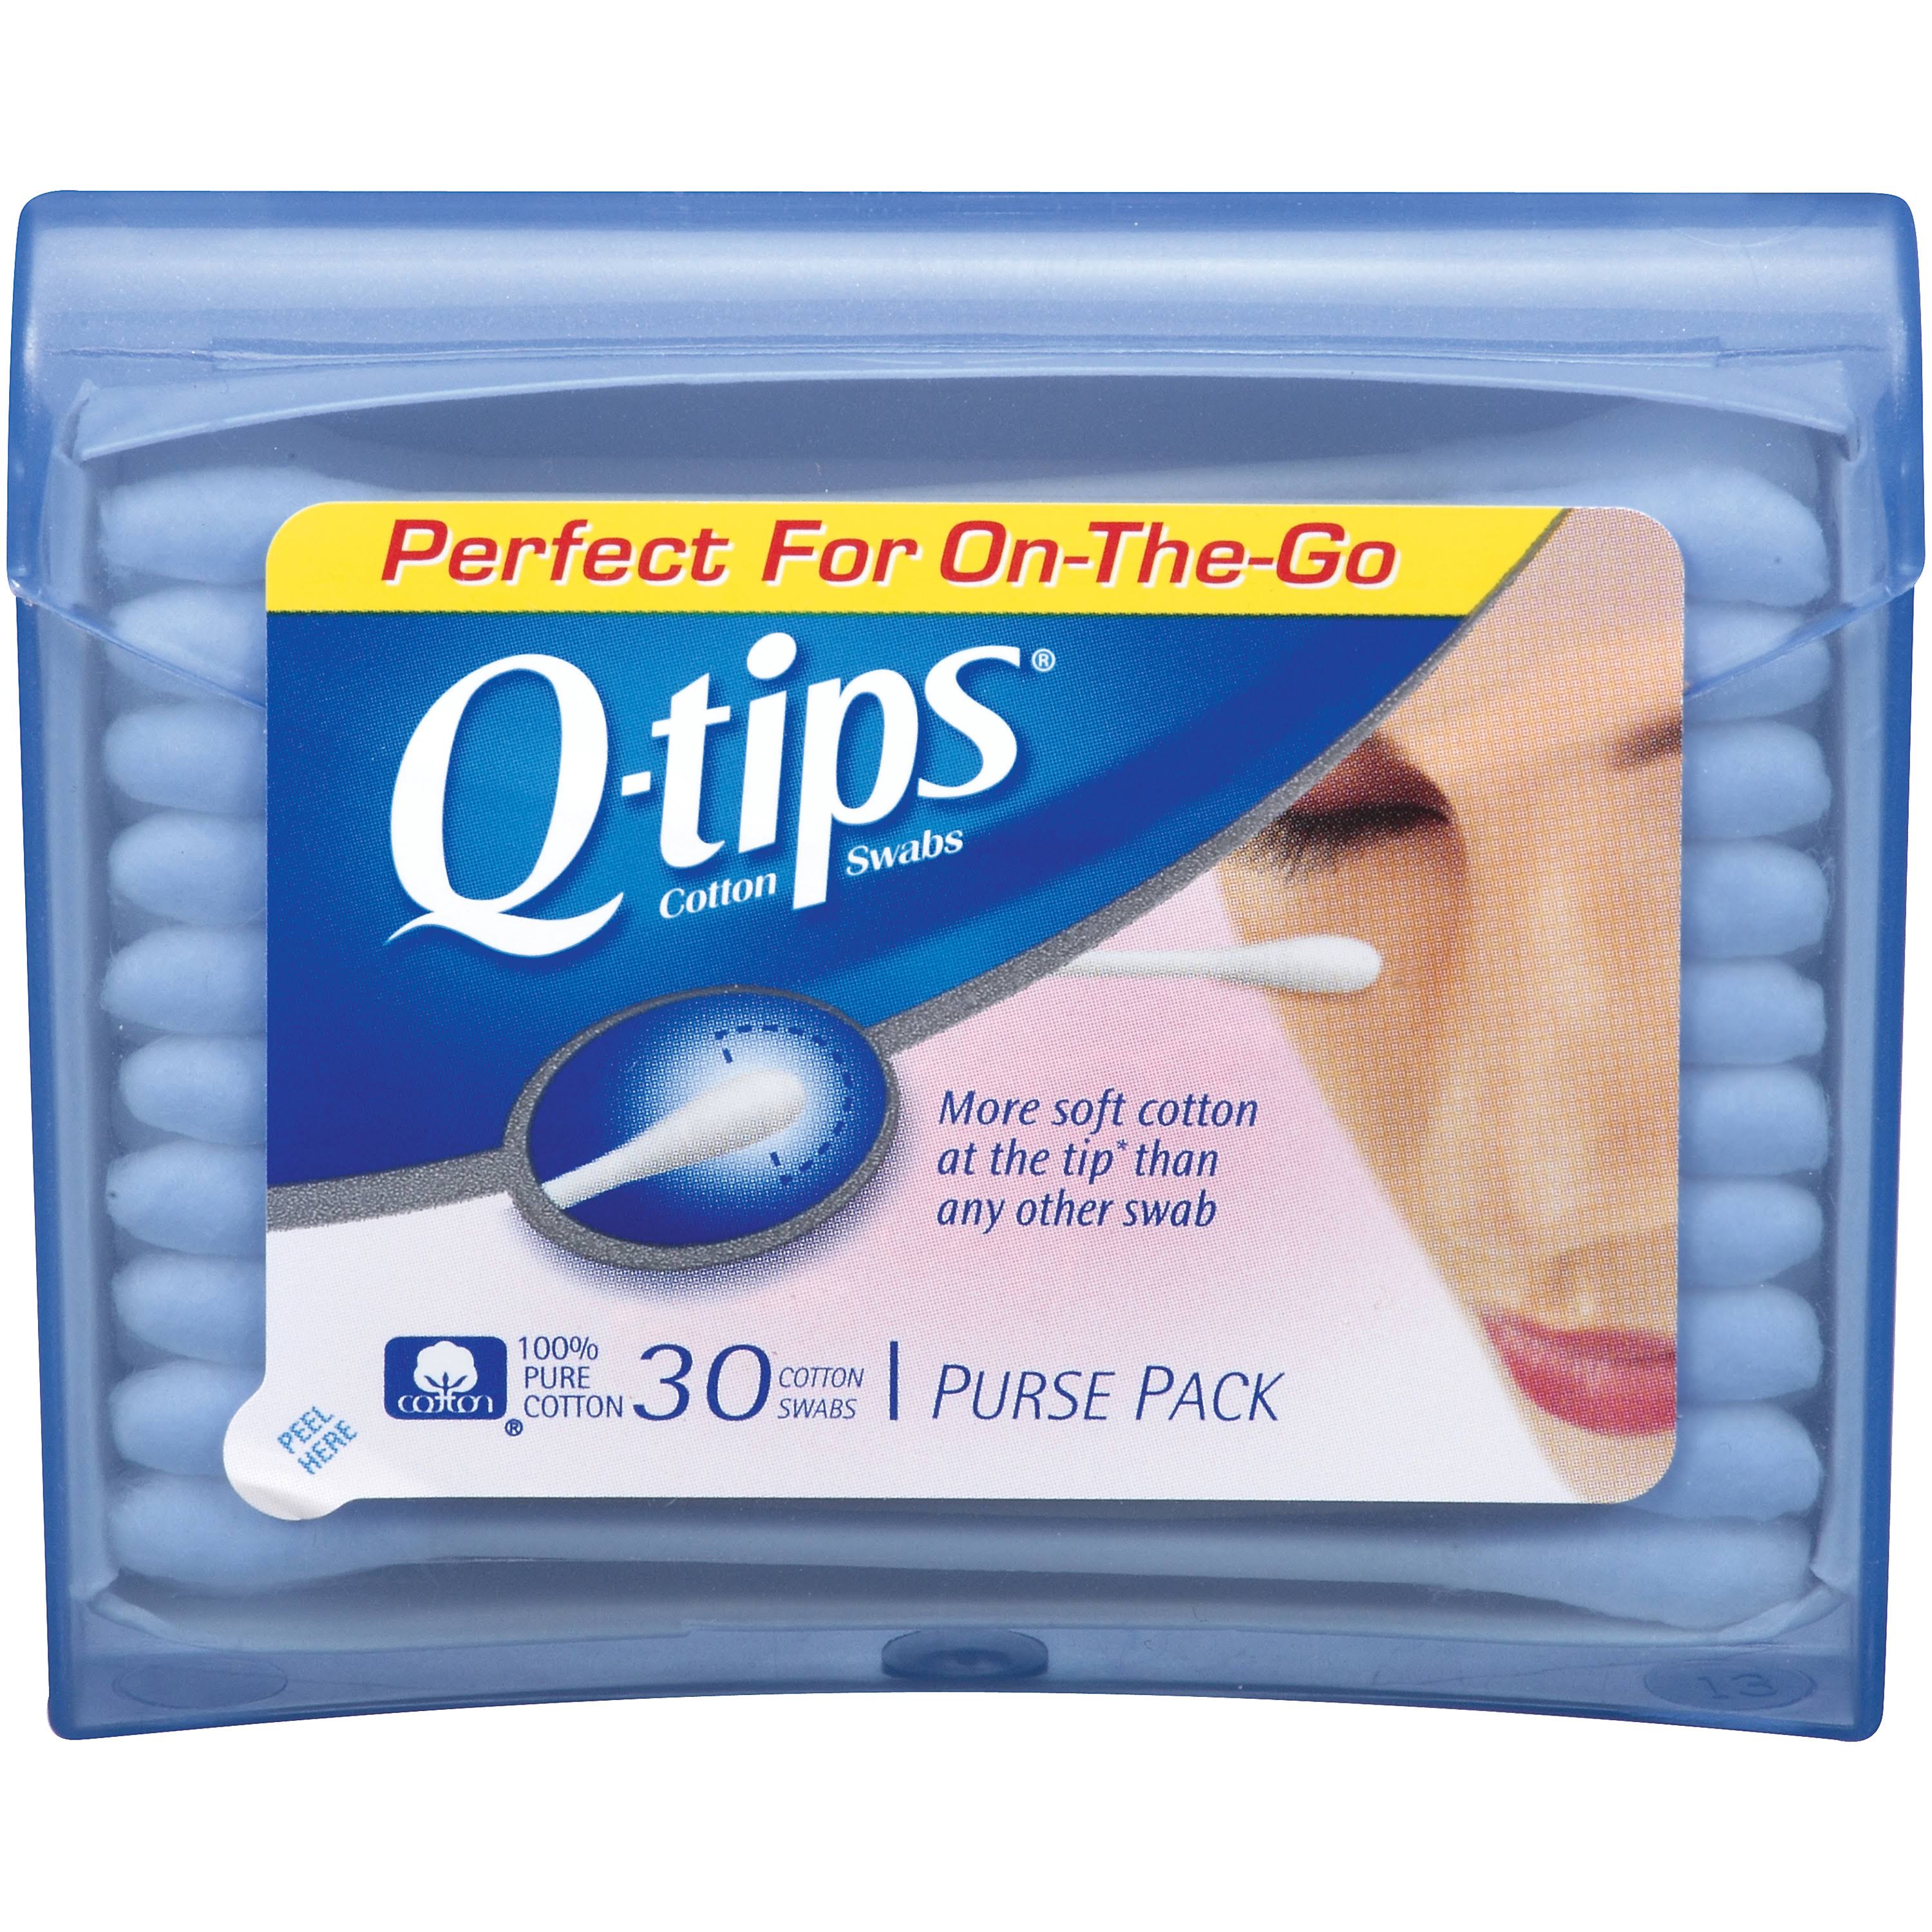 Q-Tips Cotton Swabs - 30 Pack